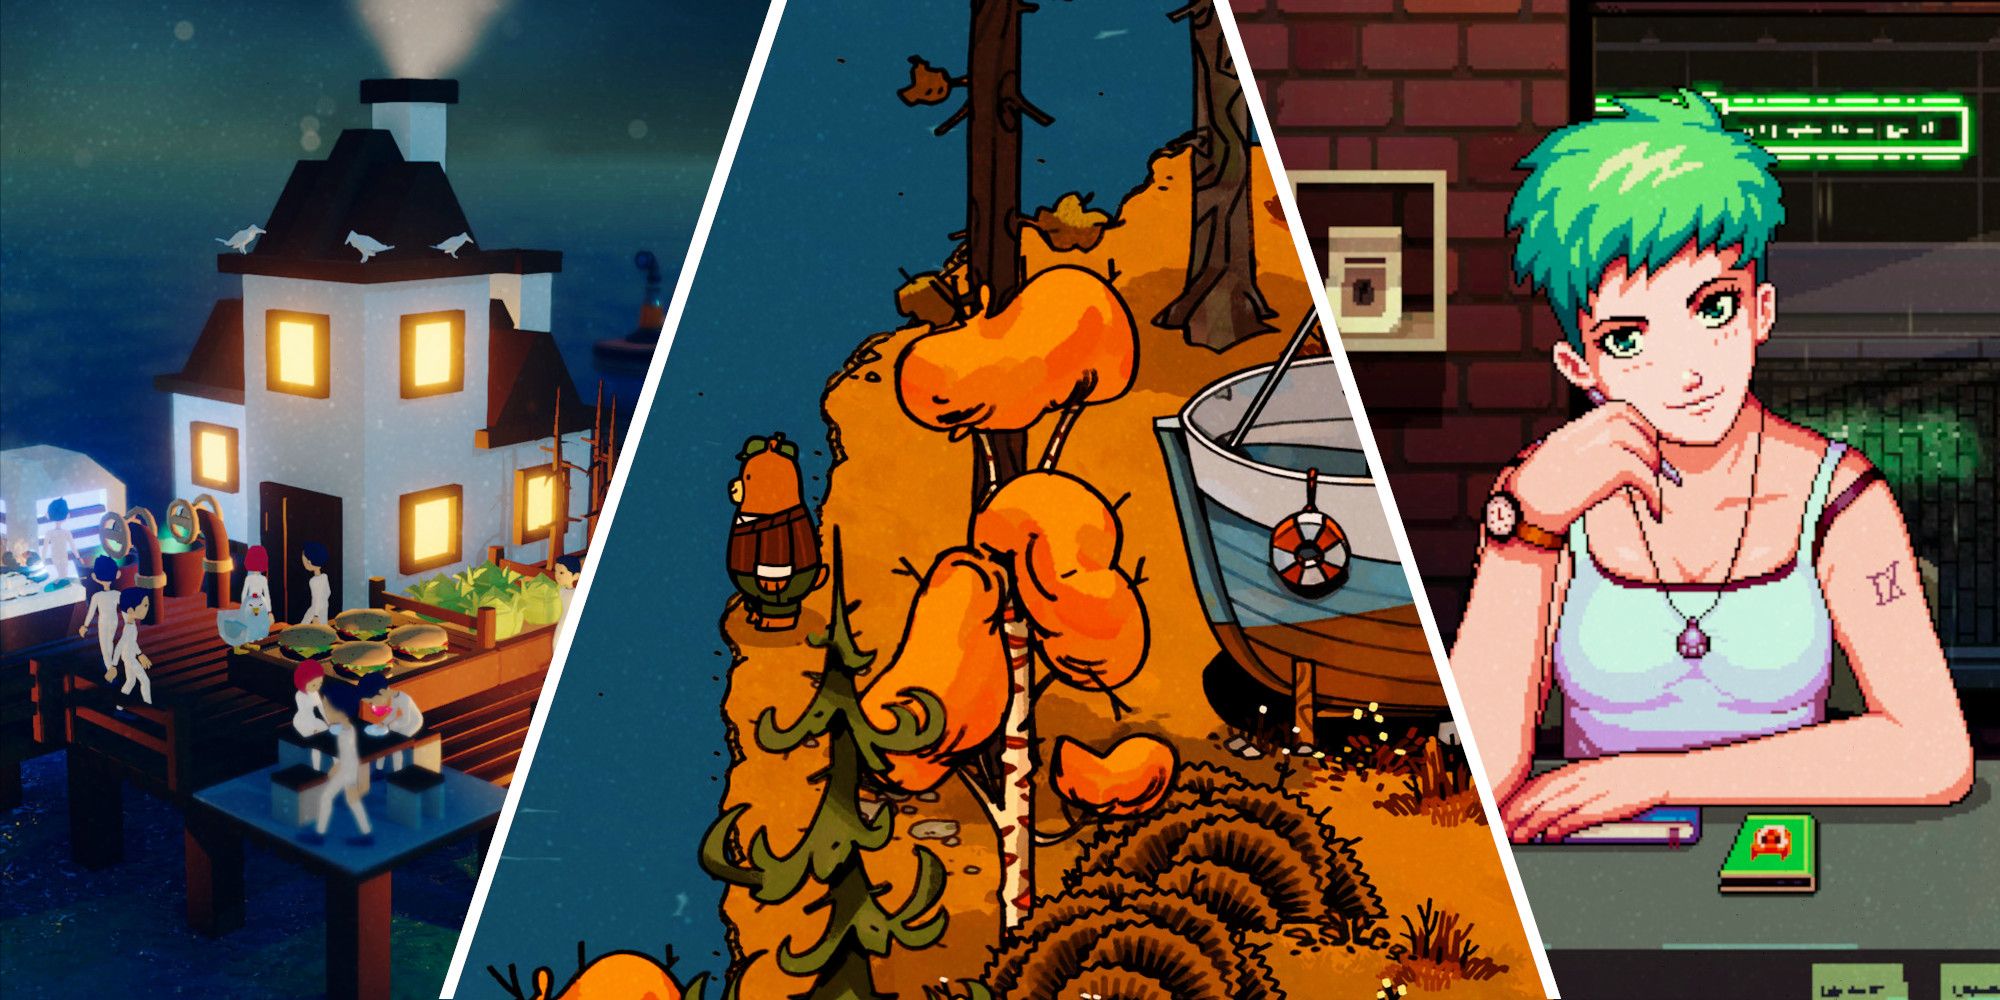 Three images from different games: a house in Havendock, an outdoor scene from Bear and Breakfast, and a character from Coffee Talk